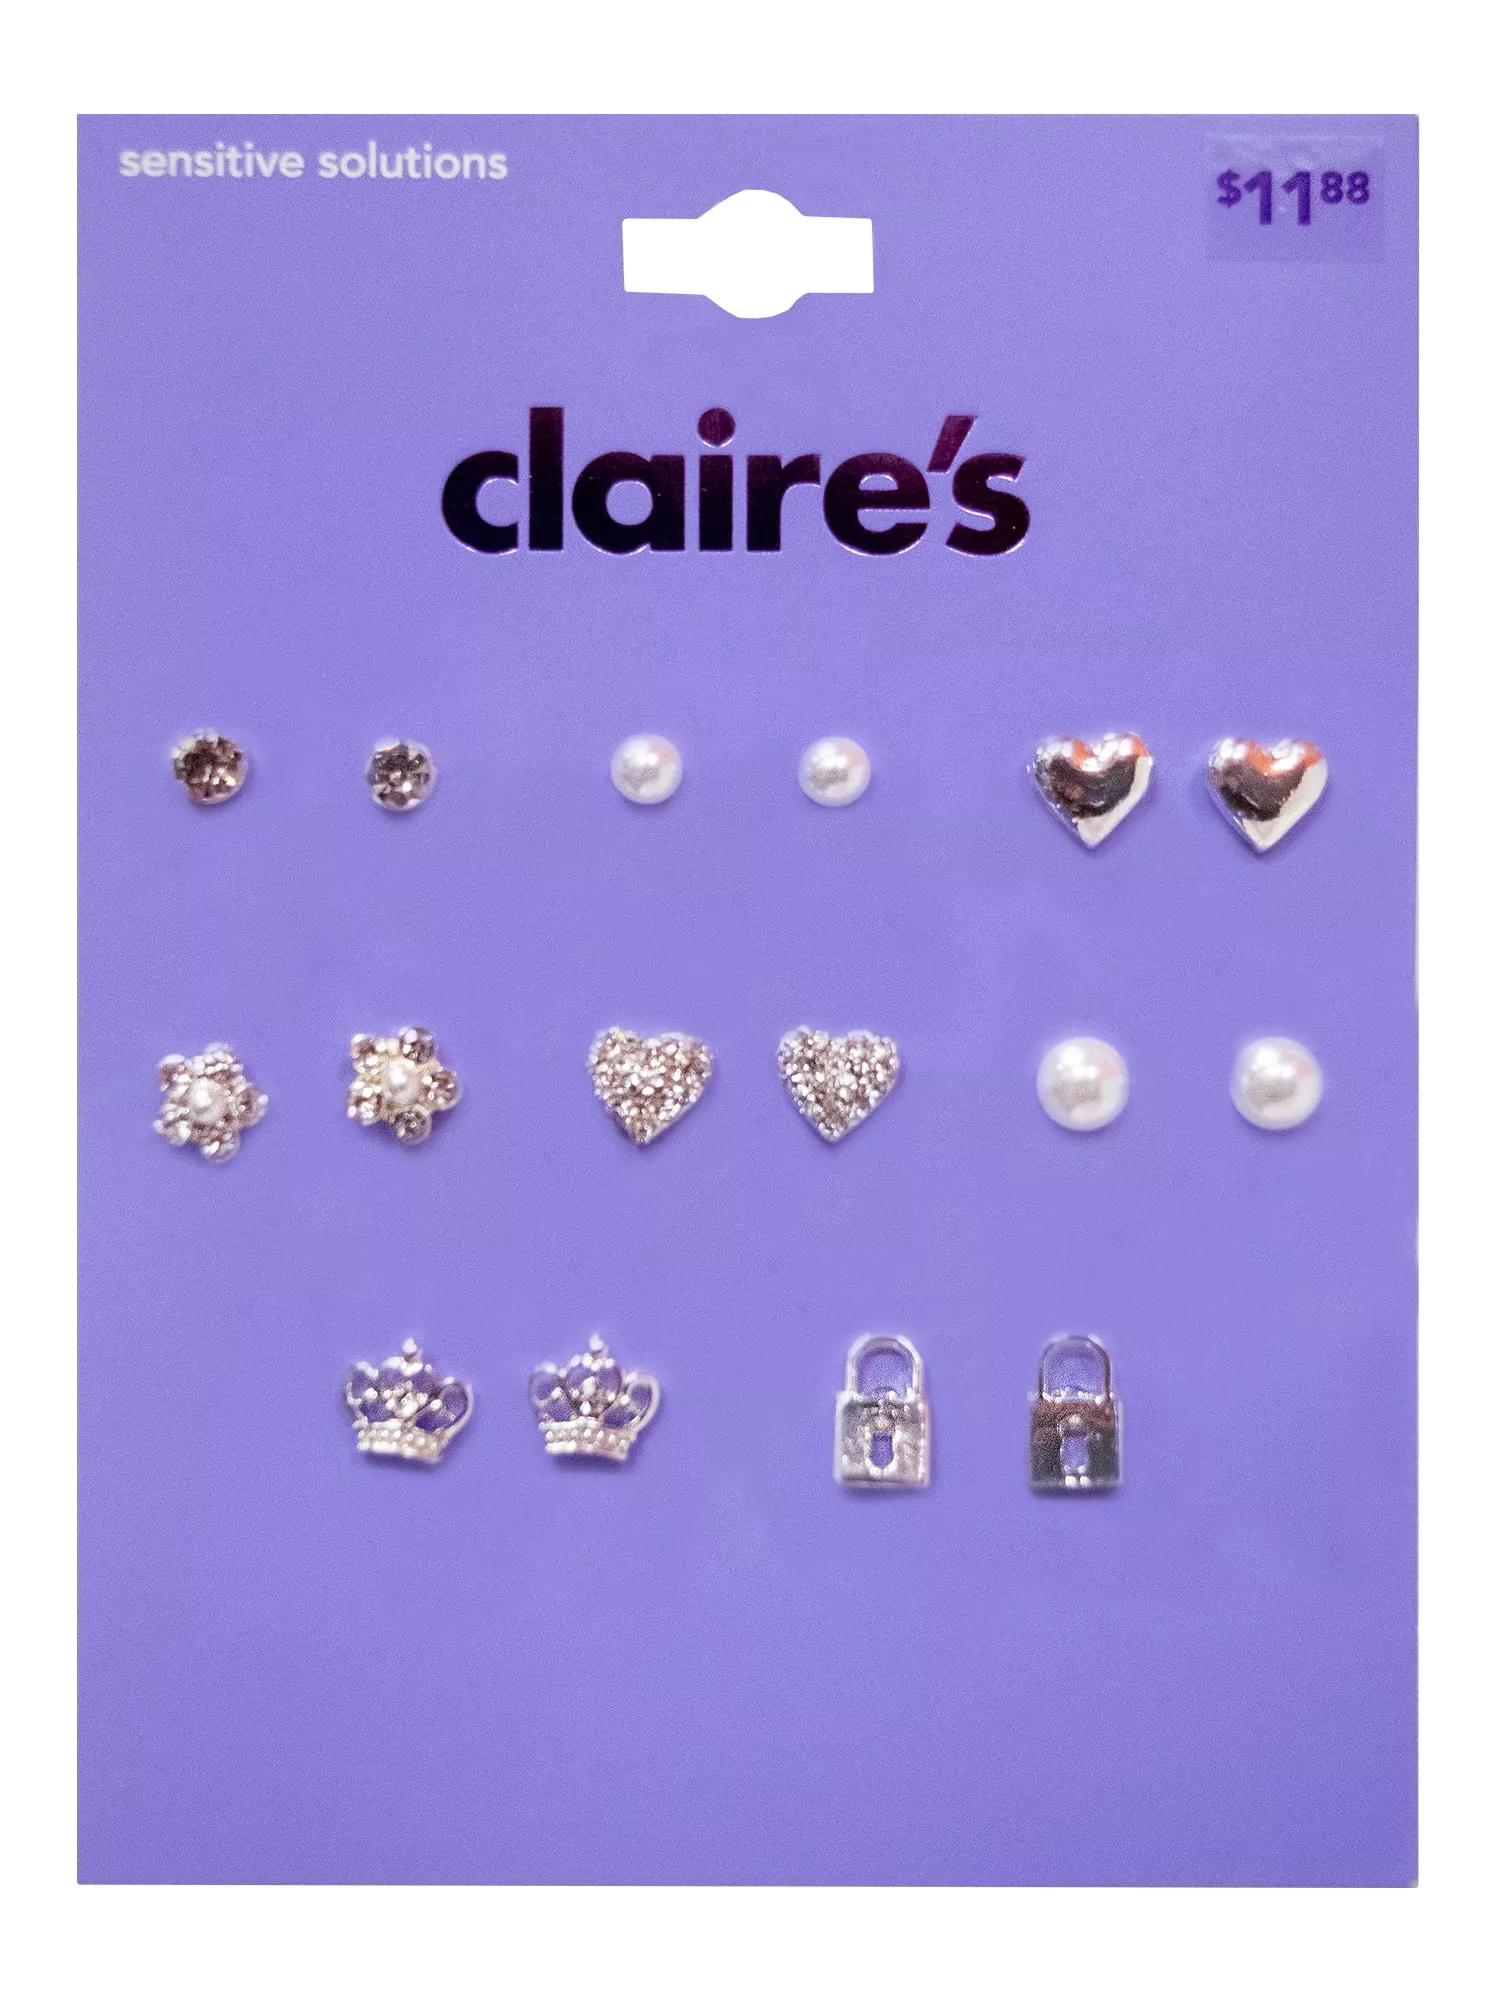 Claire's Girls' Critter Happy Stud Earrings Set, Post Back, 10 Pack, 76220